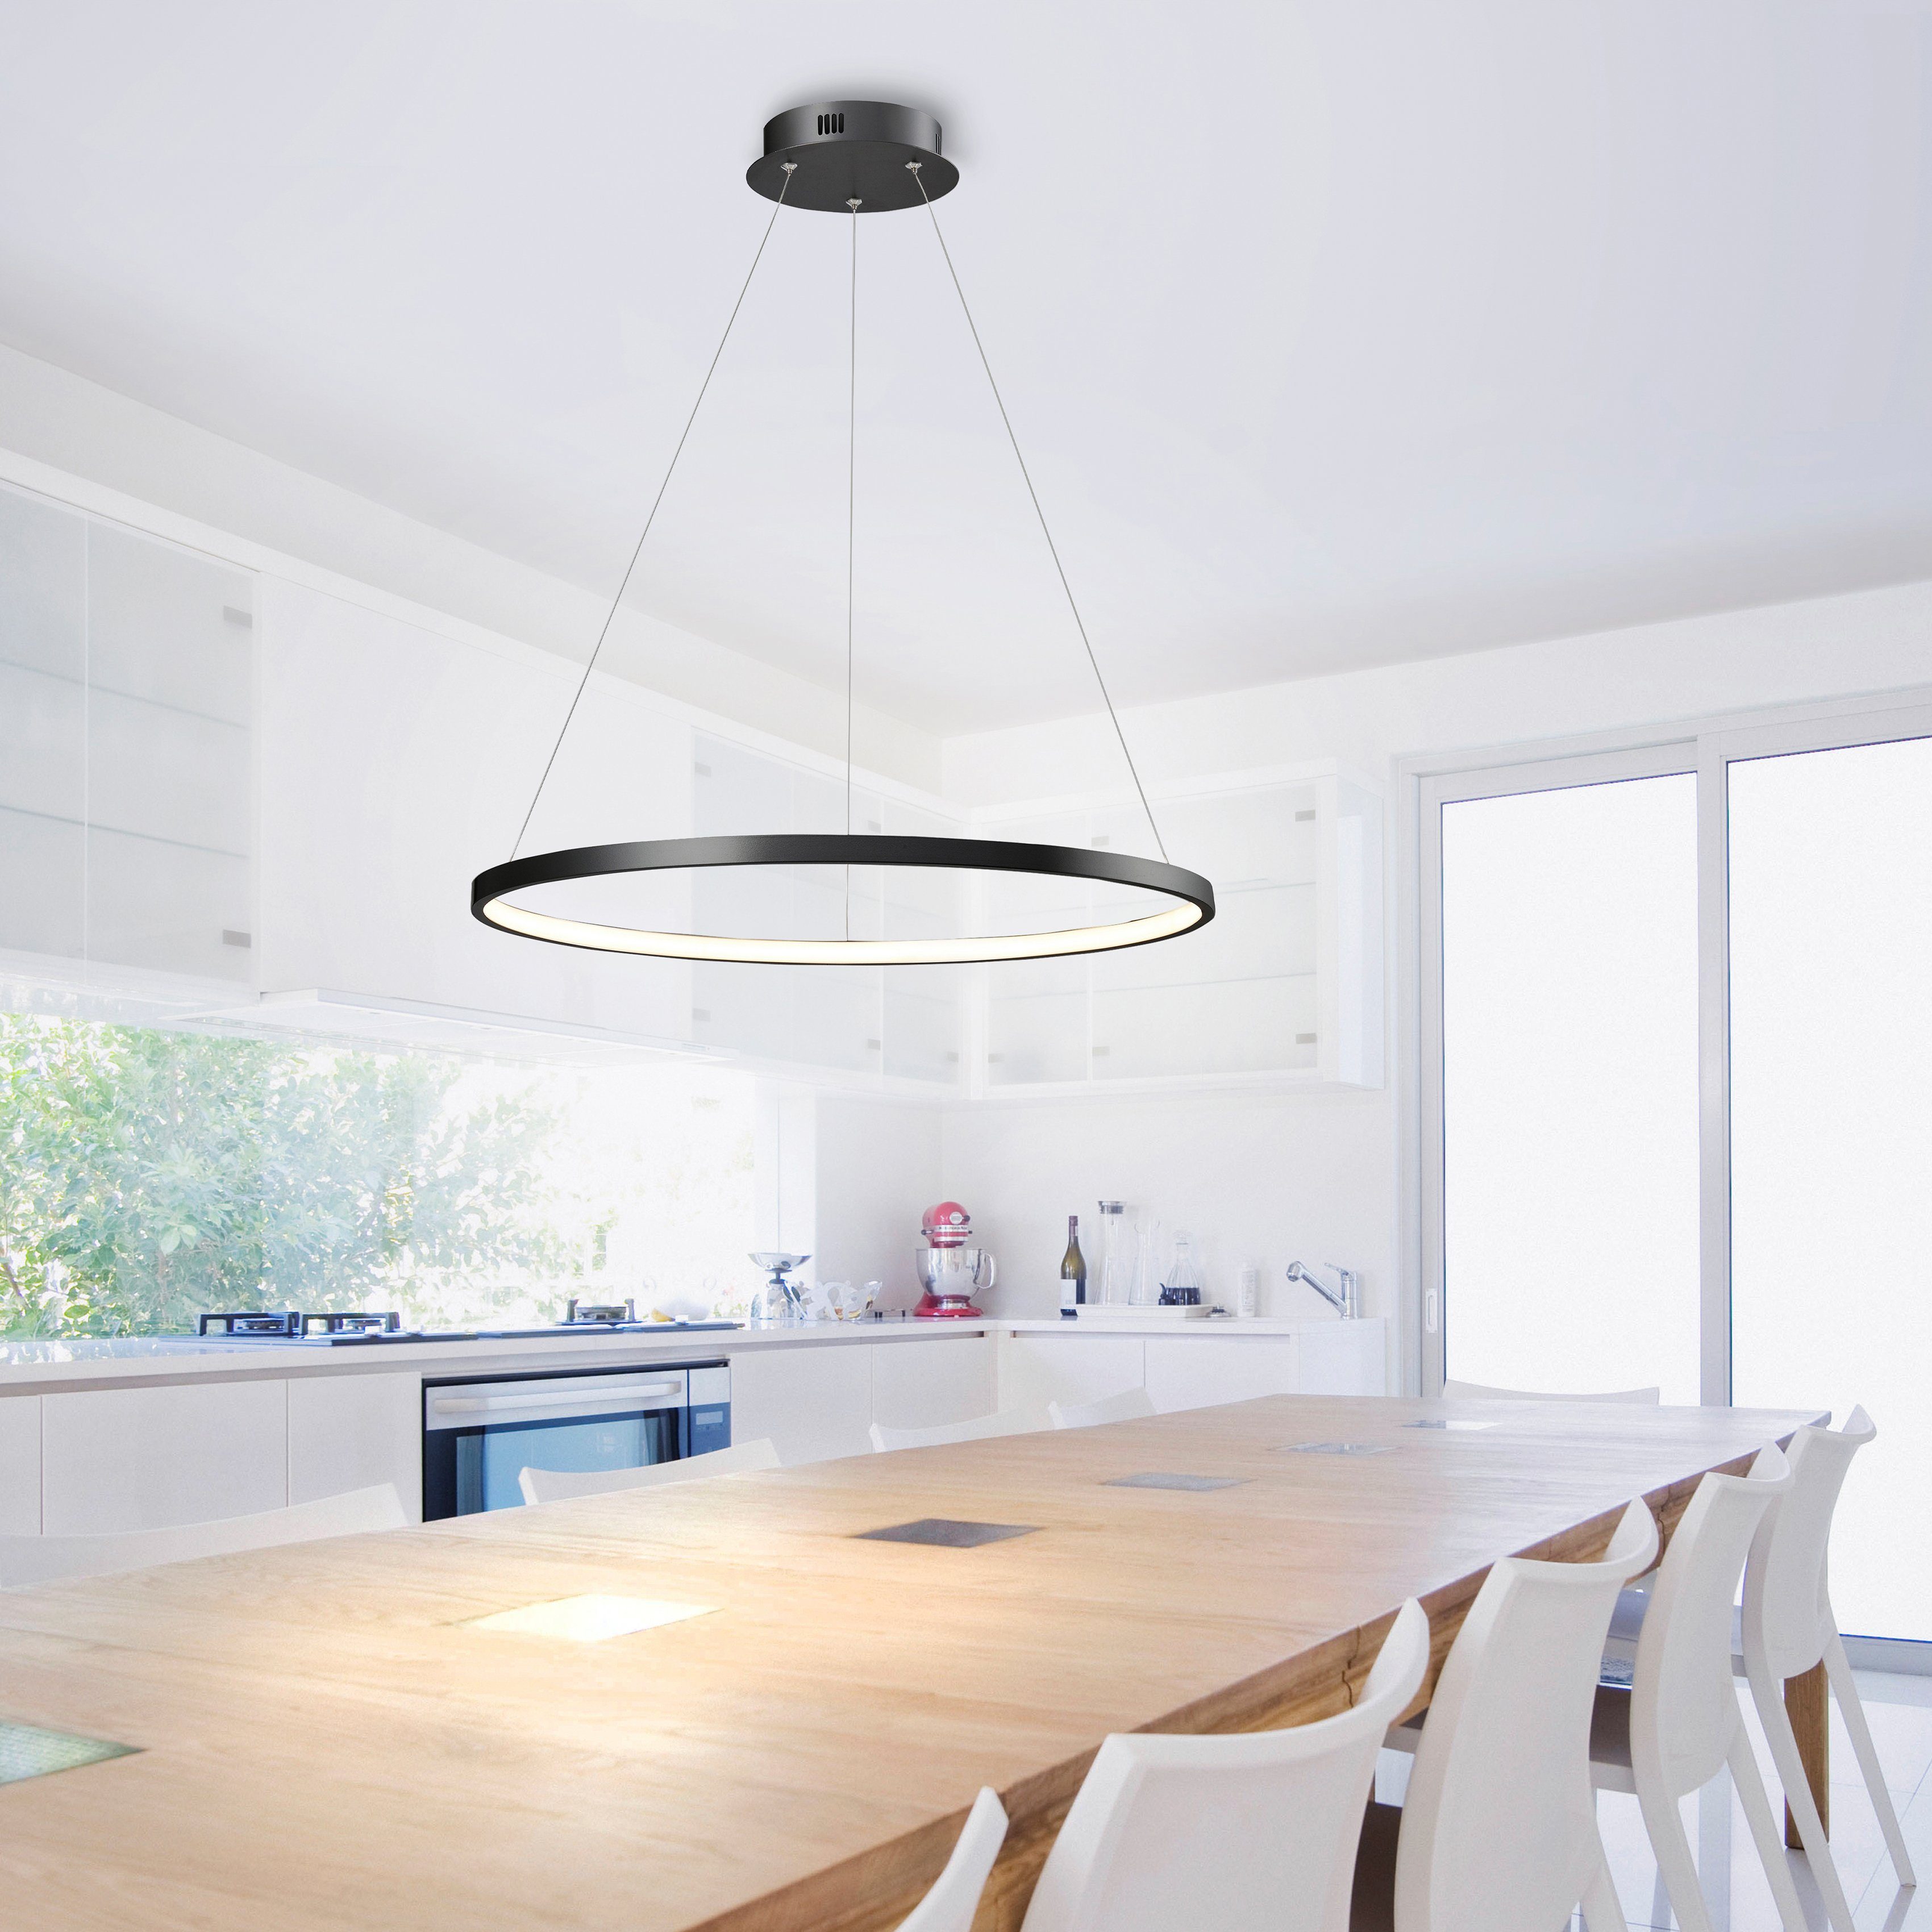 of Places fest Style modern Hängelampe Ring LED Raylan, Pendelleuchte LED Warmweiß, integriert, LED